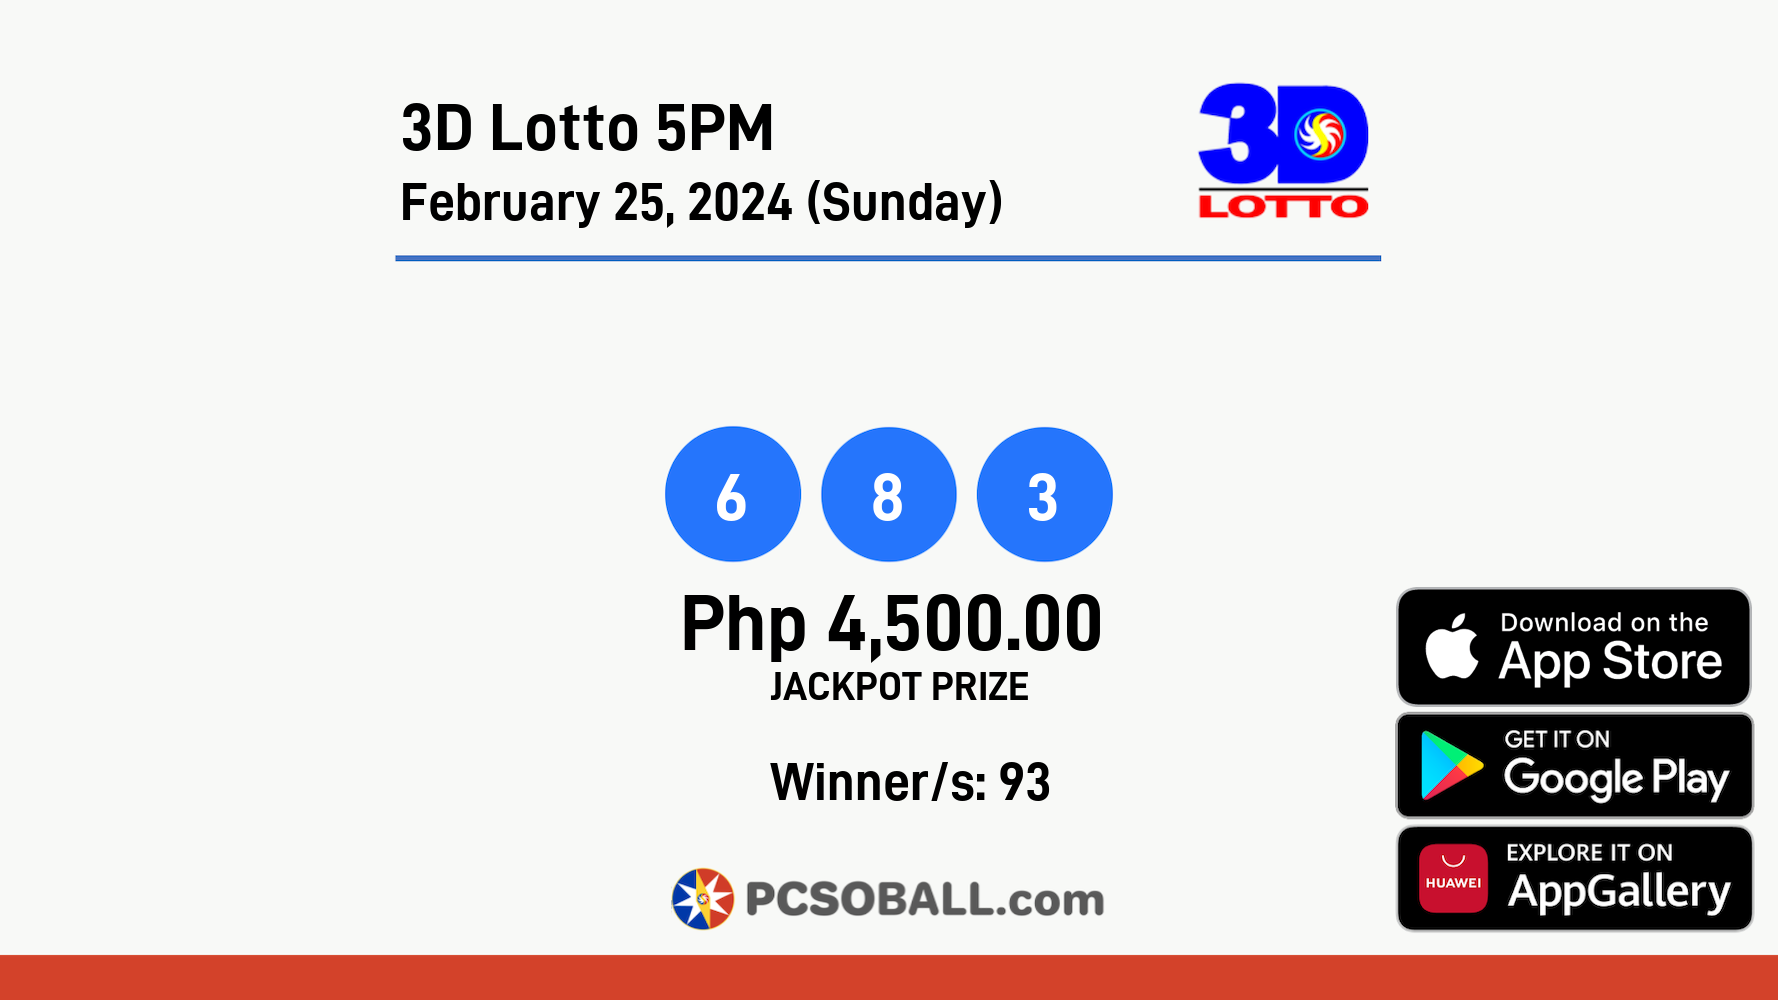 3D Lotto 5PM February 25, 2024 (Sunday) Result